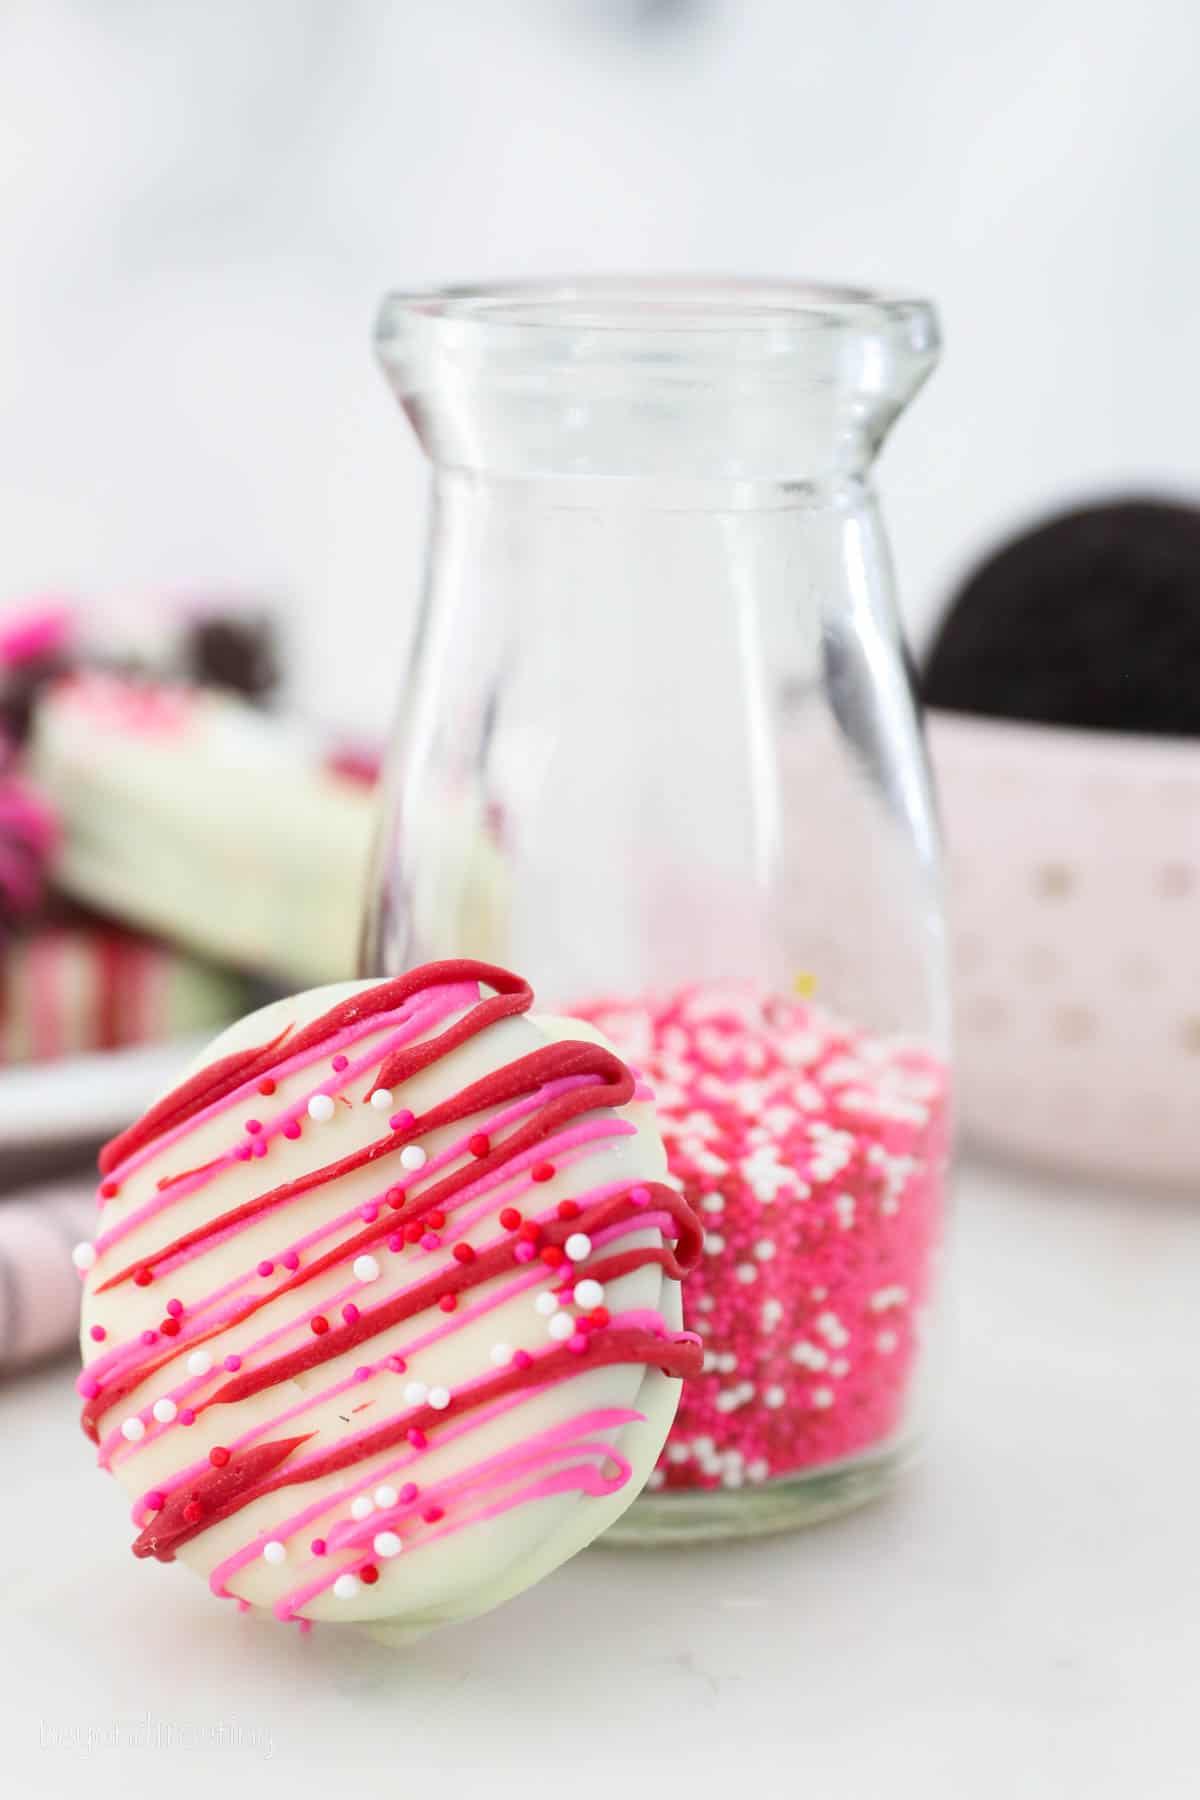 A chocolate dipped Oreos decorated for Valentine's day, covered in red and pink drizzle with sprinkles/